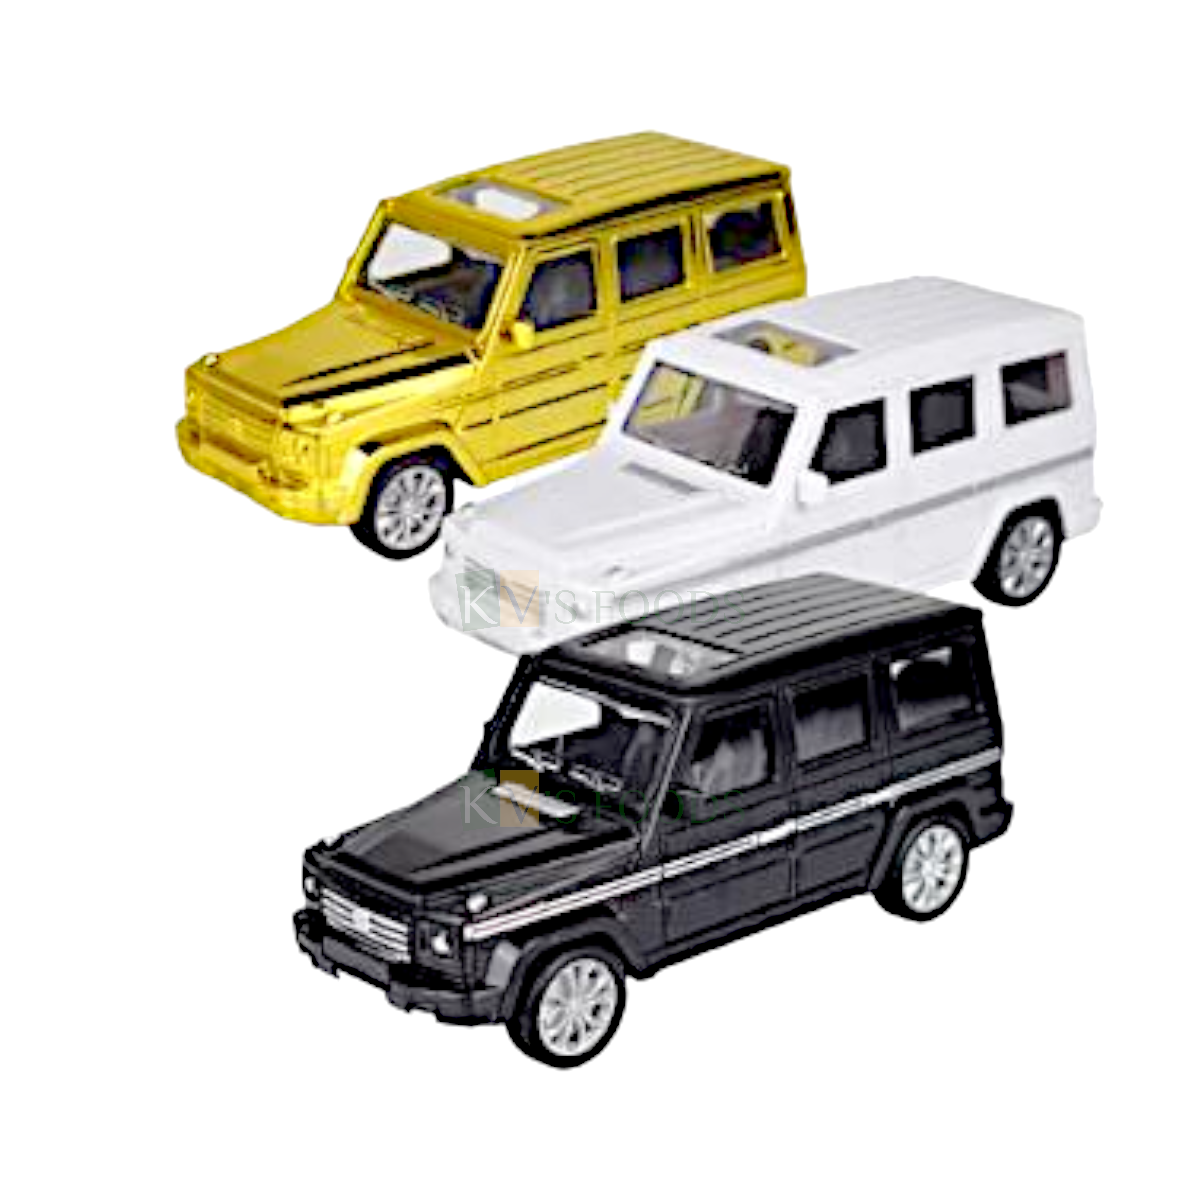 1PC Black White Golden New Thar SUV Jeep Hummer Car Cake Topper Cake Decoration Miniature Figurine, Toy, Gift Children's Play Toys Set, Figure for Shelf Desktop Office Collections